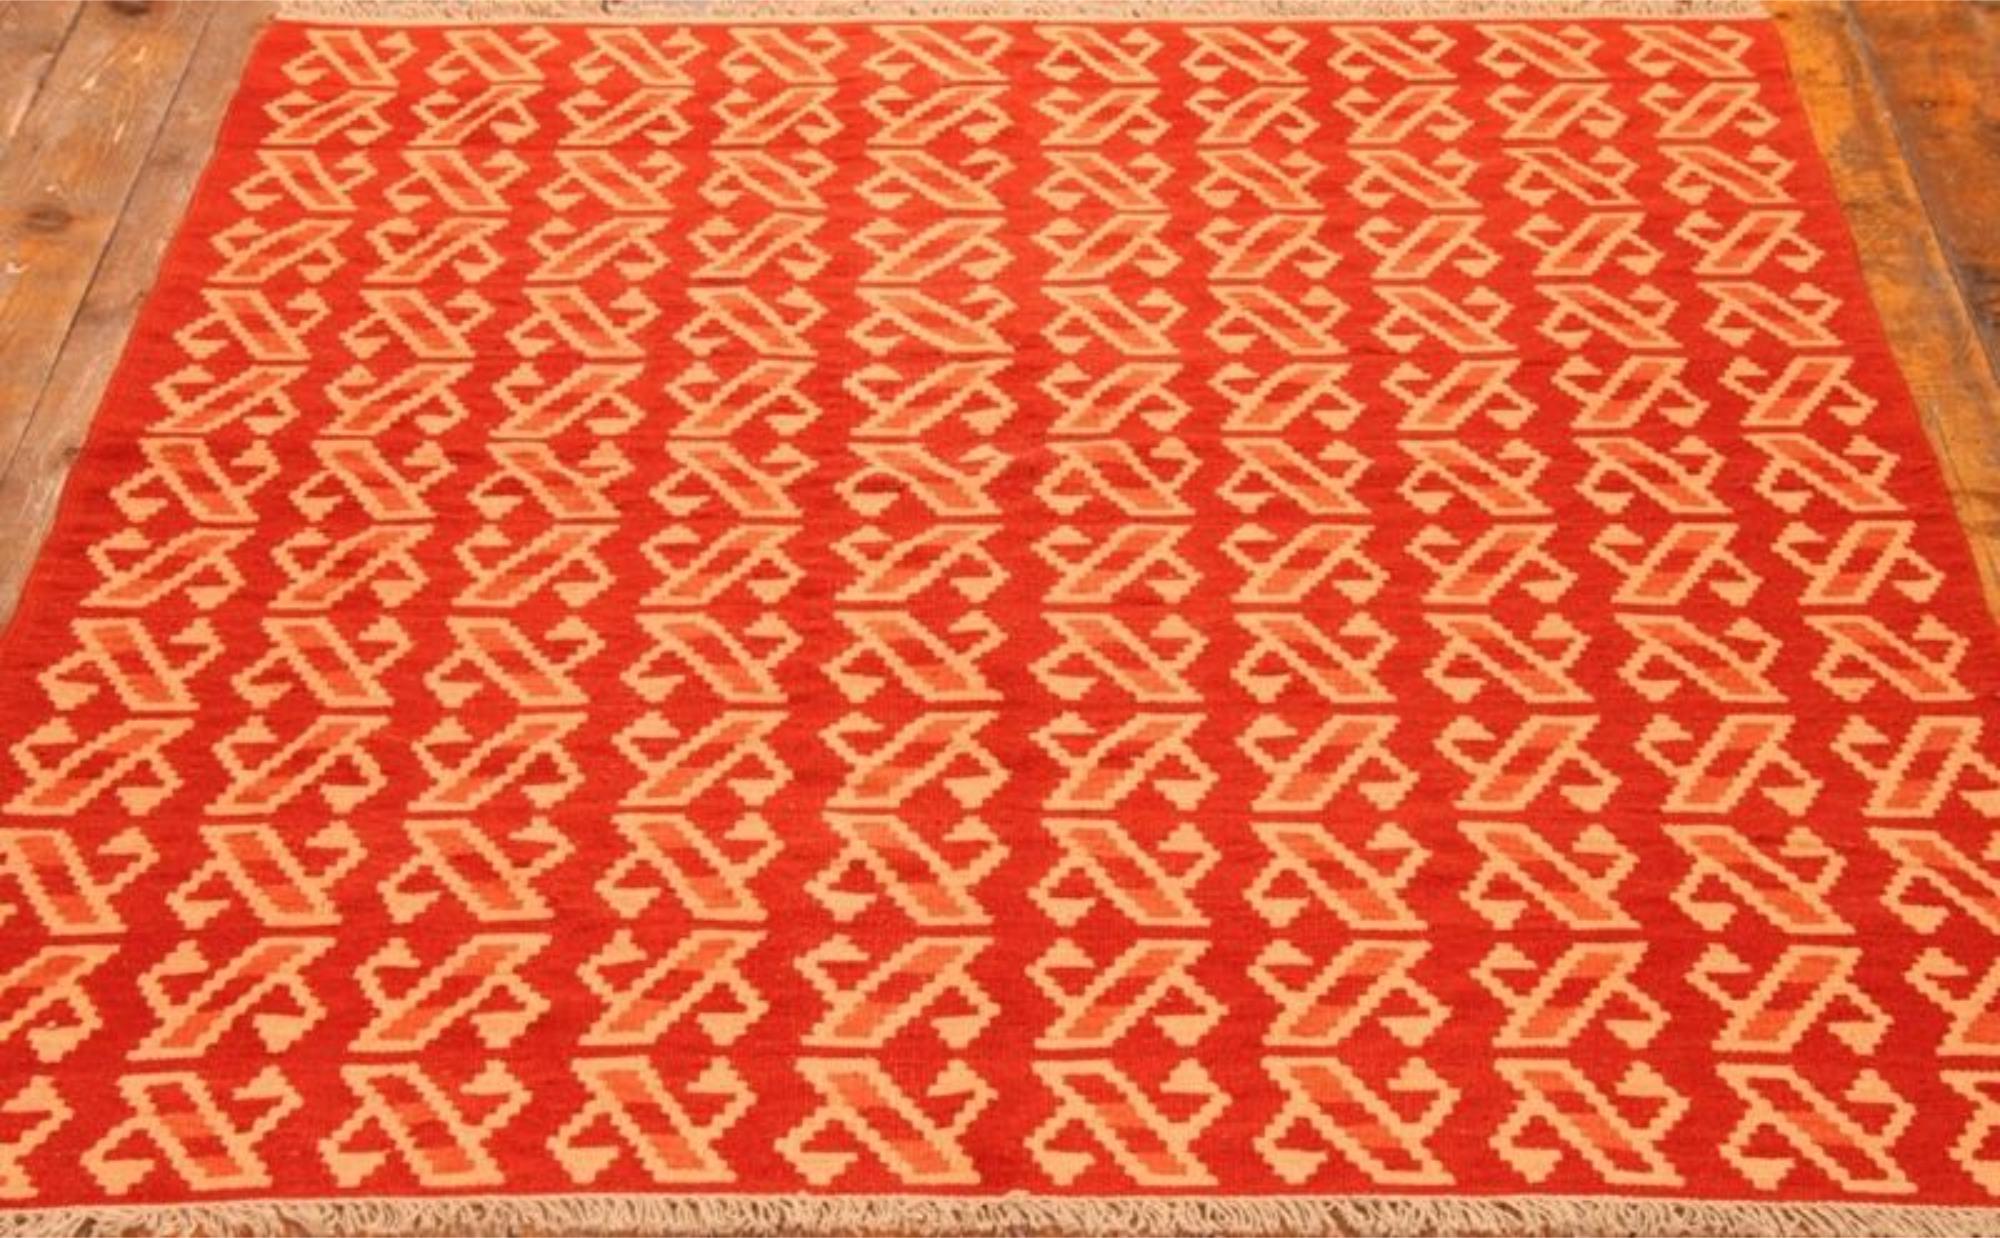 Wool Handmade Vintage Persian Style Ardabil Kilim Rug 5.2' x 6.8', 1970s - 1T36 For Sale